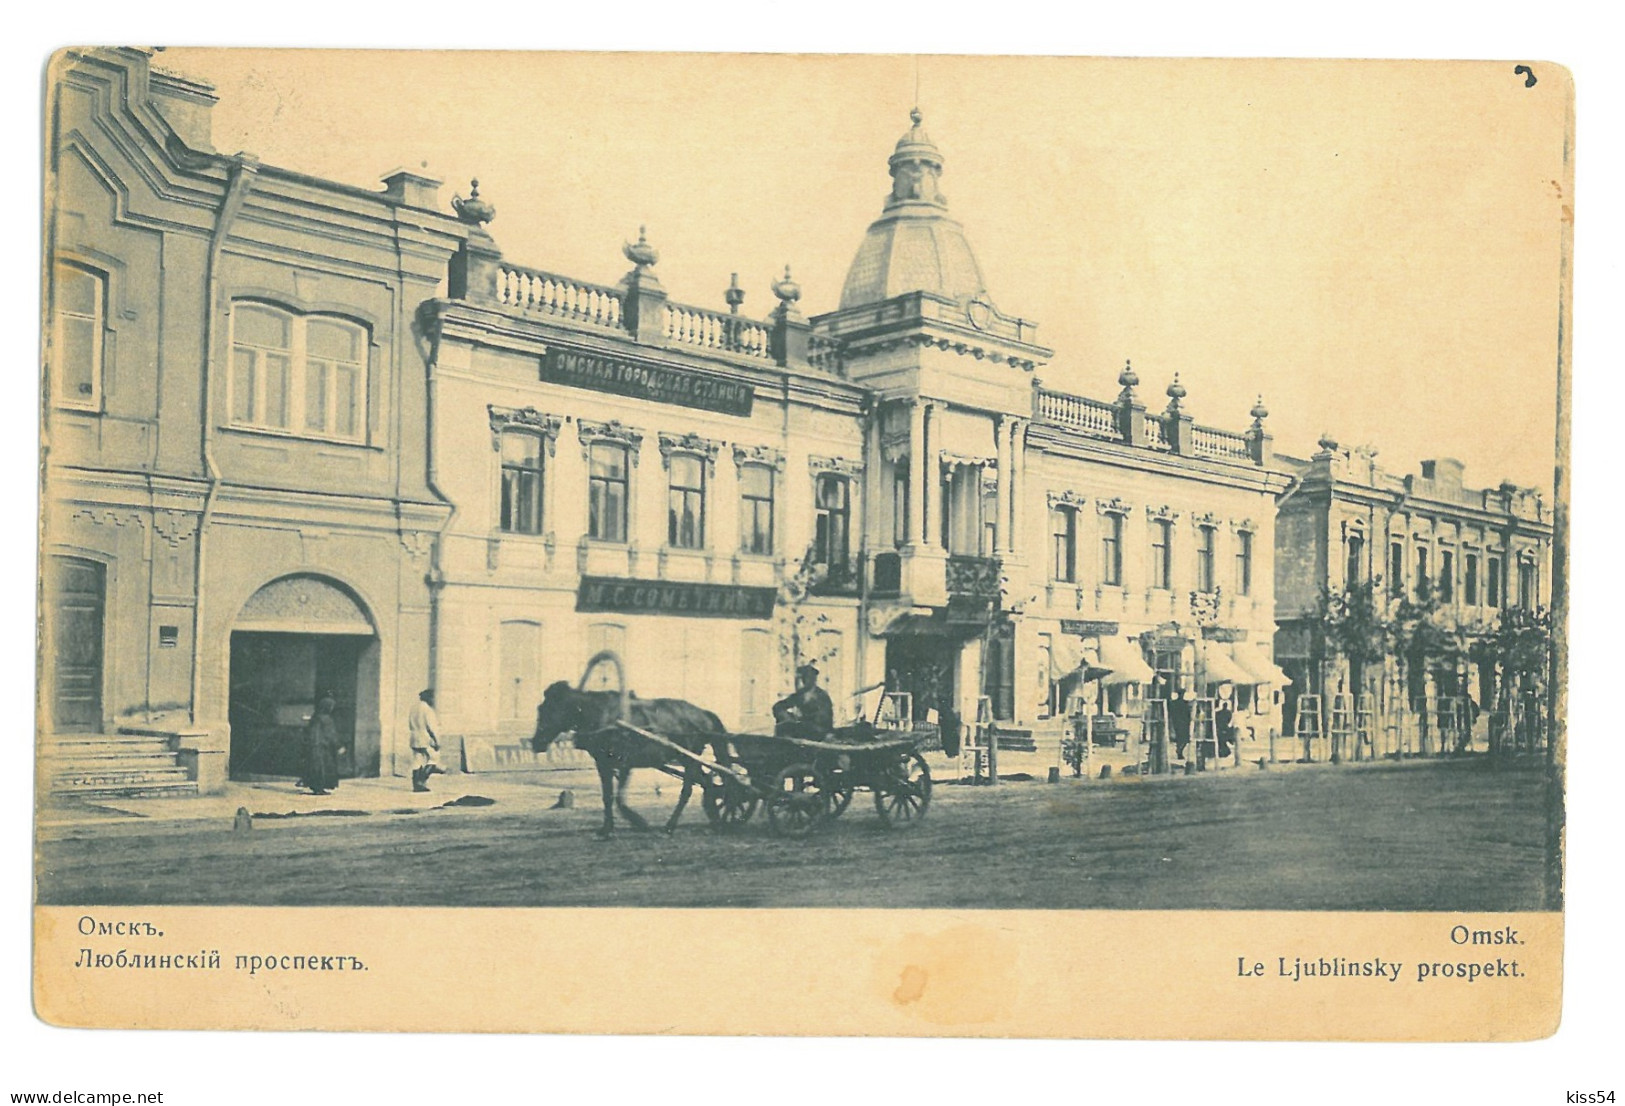 RUS 00 - 17924 OMSK, Railway Station, Russia - Old Postcard - Used - 1911 - Rusia